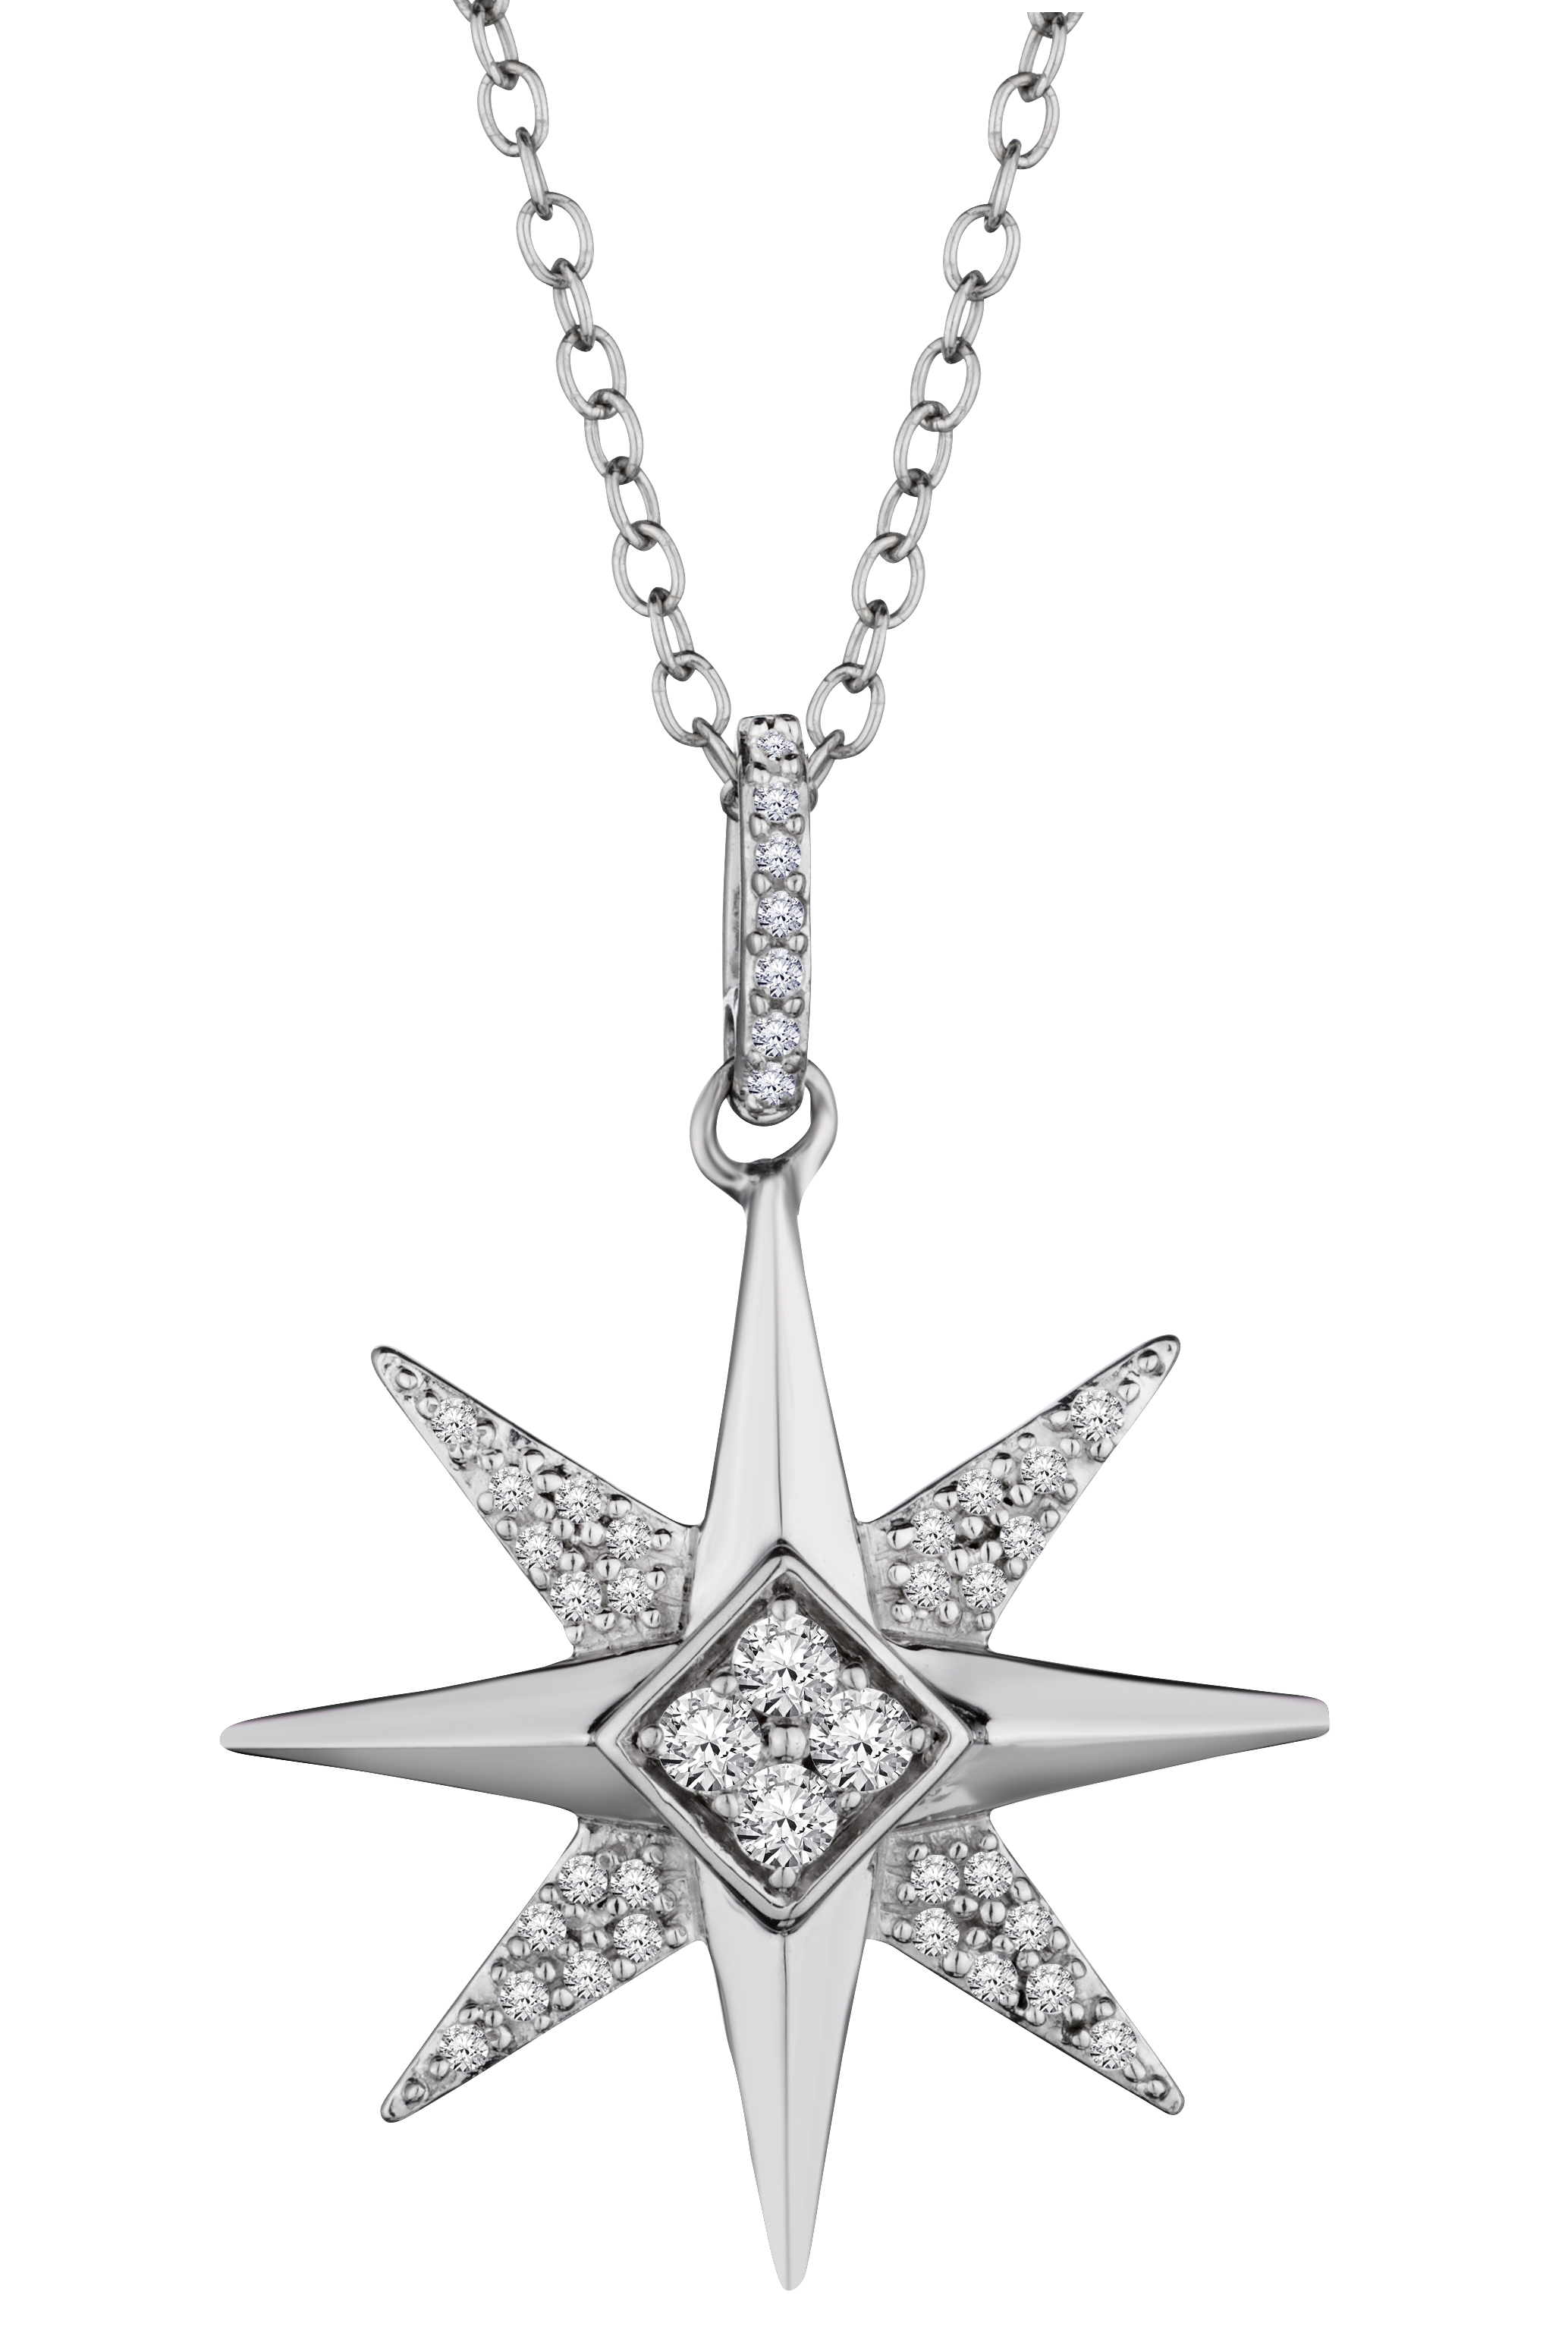 Product image of .20 Carat of Diamonds "Star of Light" Pendant with Chain from Griffin Jewellery designs